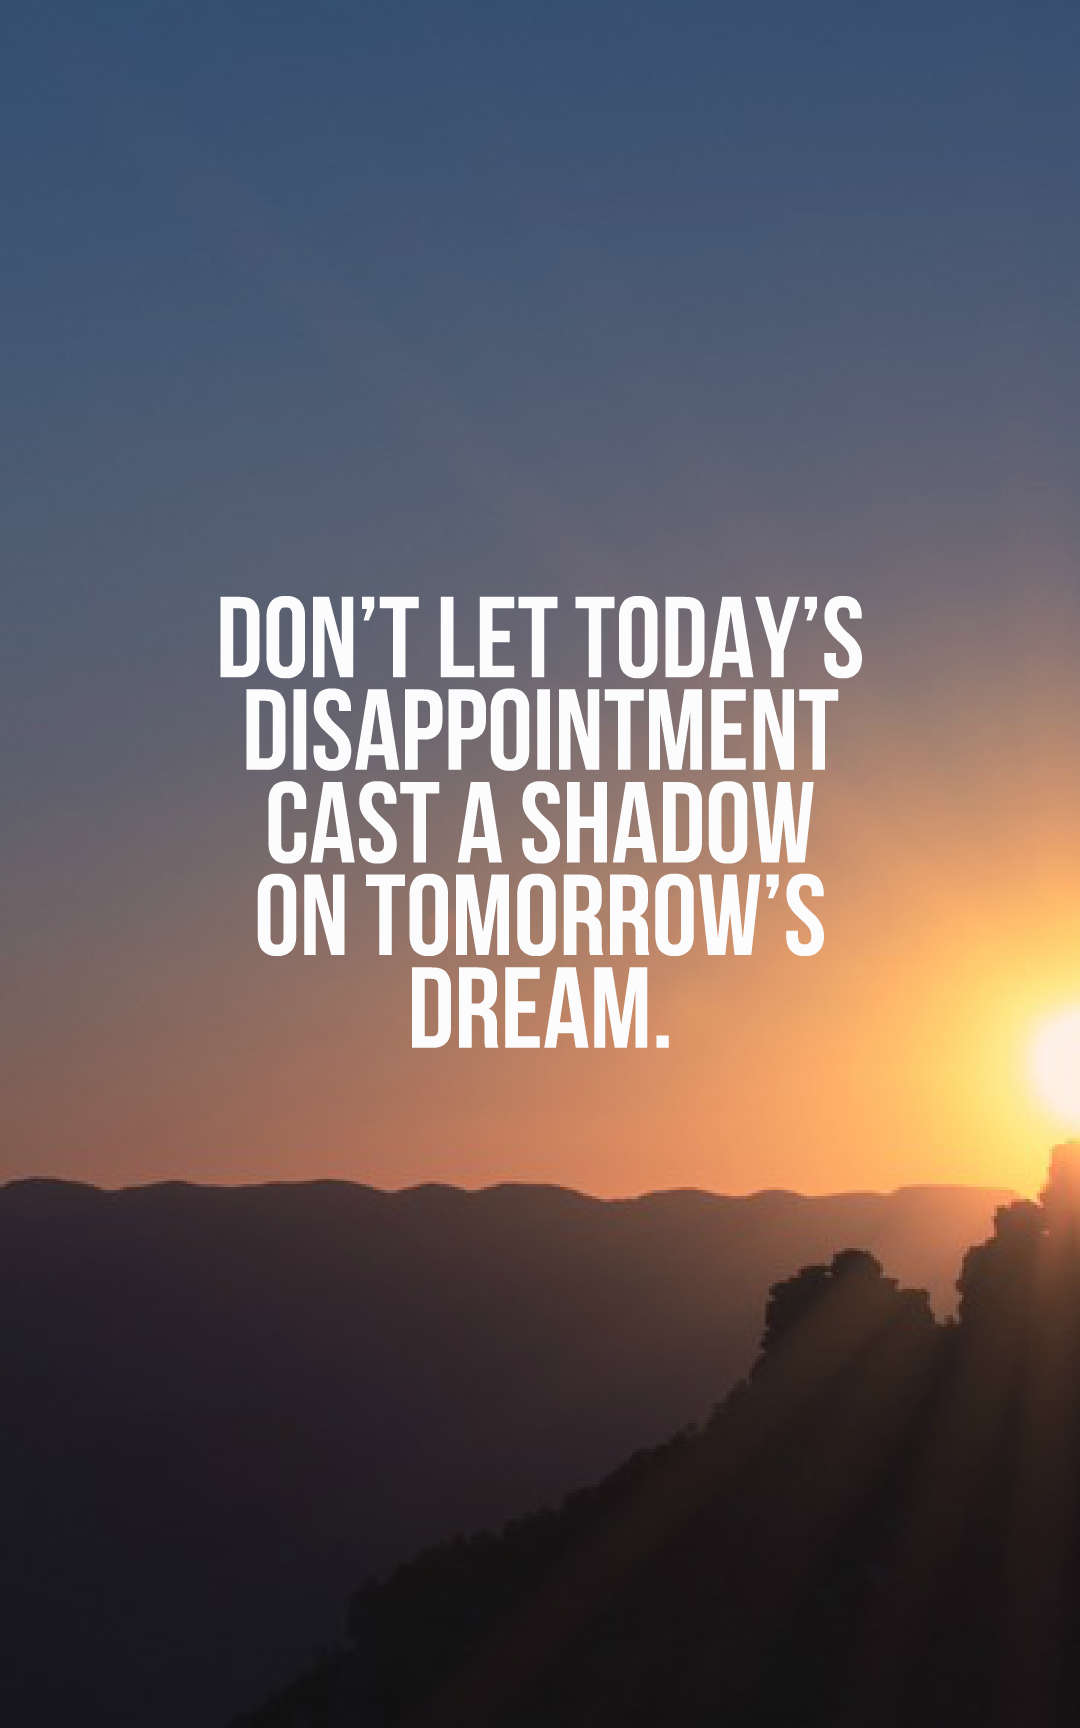 32 Inspirational Disappointment Quotes With Images
